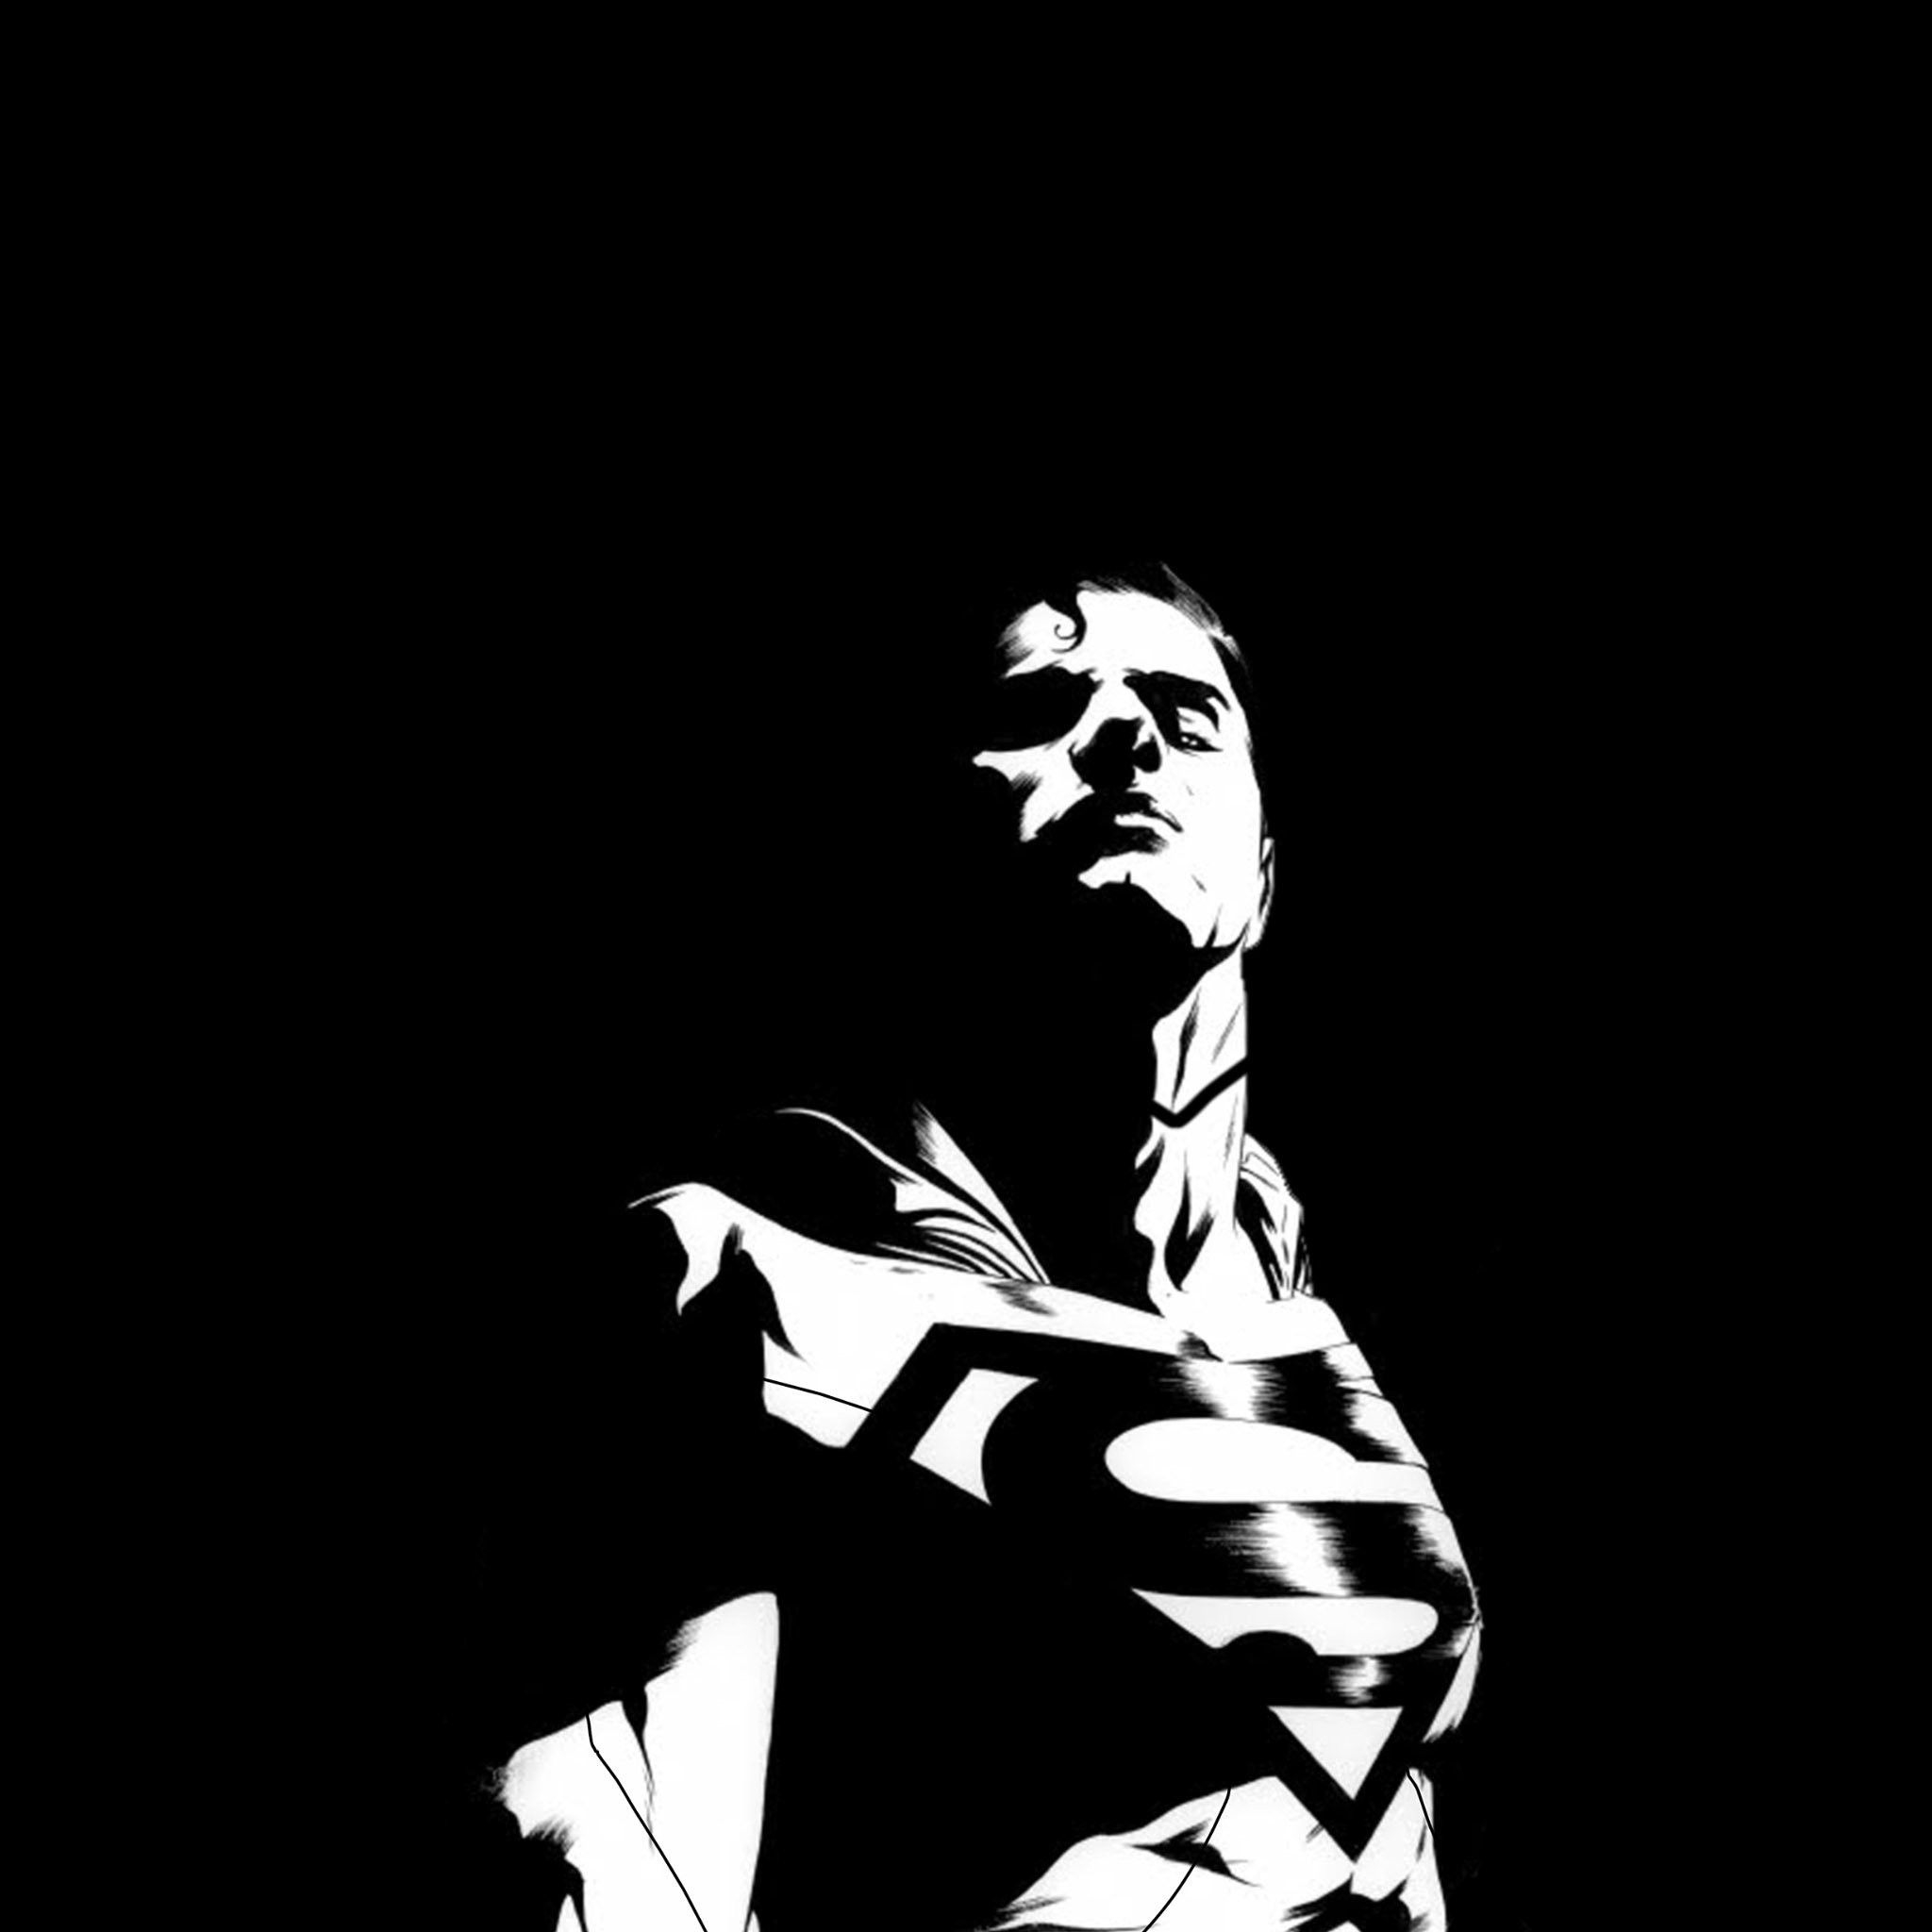 2048x2048 Black and White Superman Wallpapers Top Free Black and White Superman Backgrounds